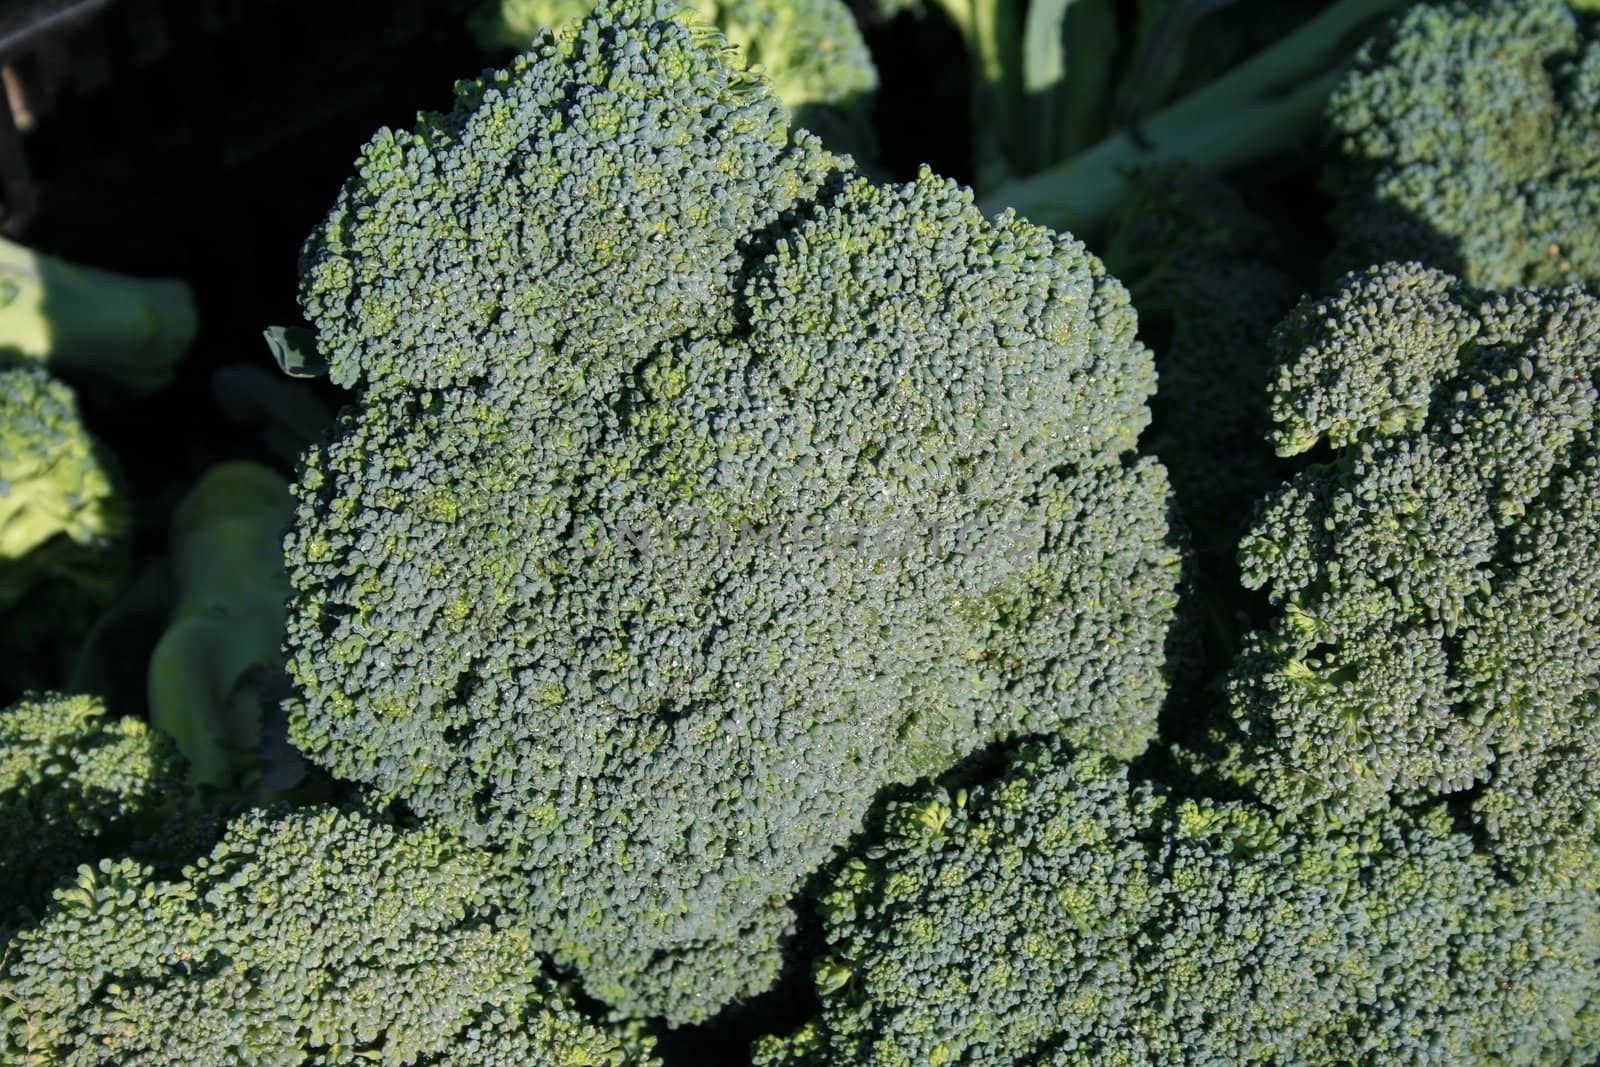 fresh broccoli bunches, close-up showing dew droplets, at farmers market